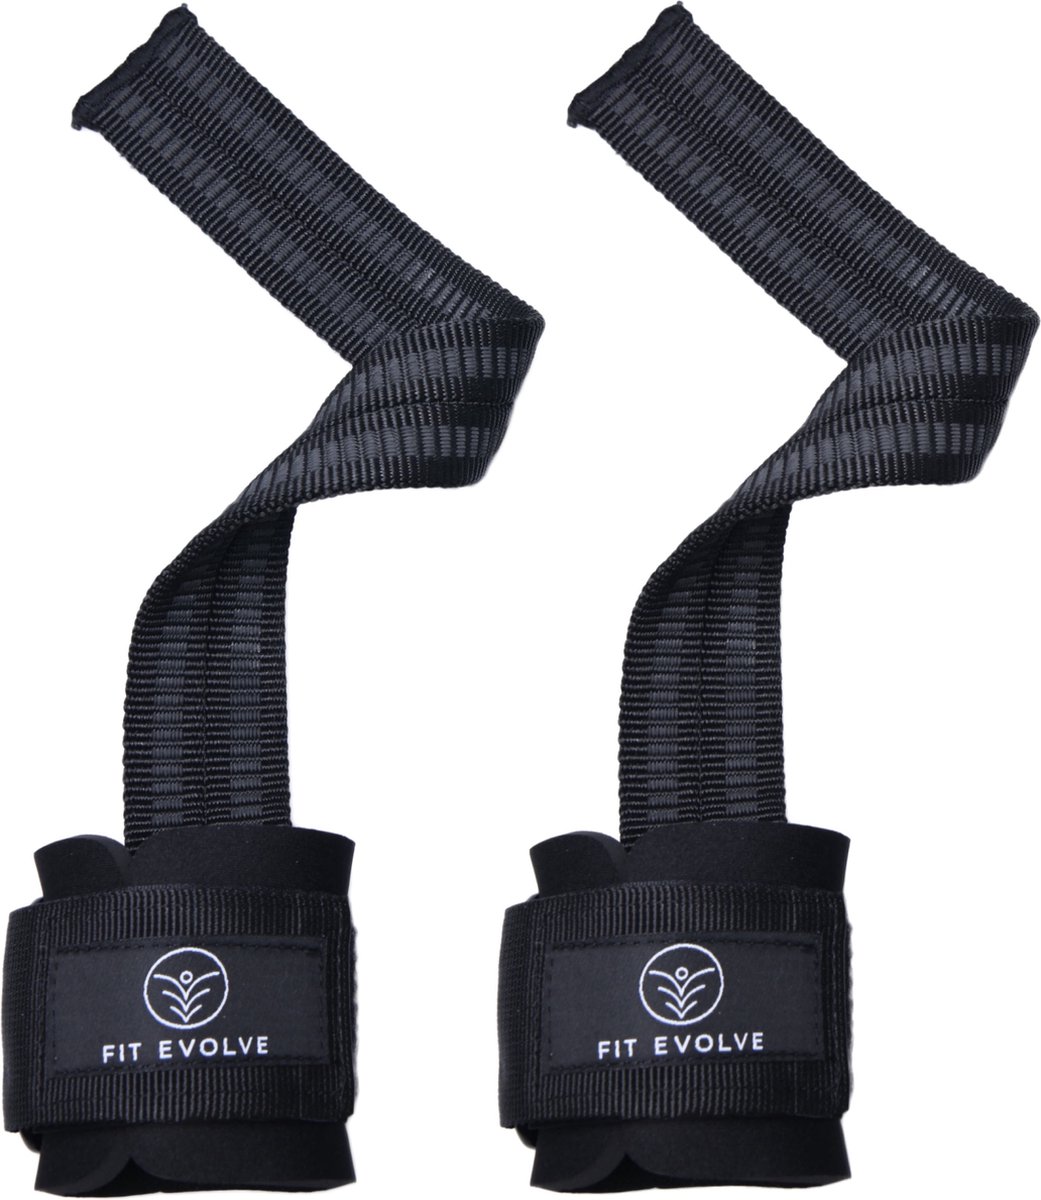 Fit Evolve Lifting Straps - Powerlifting straps - Wrist wraps - Gym straps - Lifting grips - Lifting belt